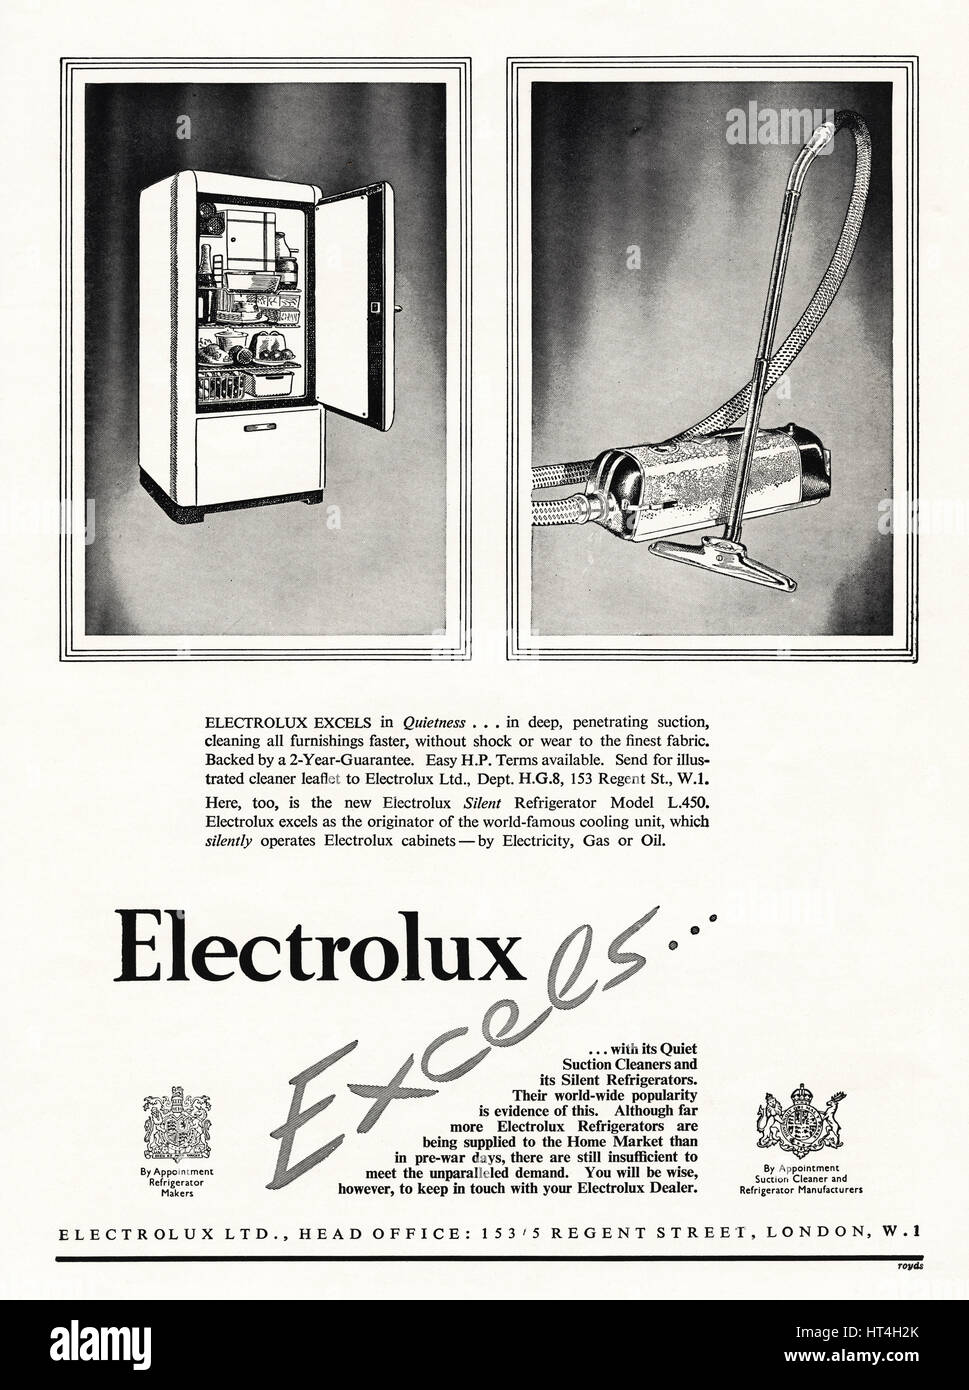 1950s advertising advert from original old vintage English magazine dated 1950 advertisement for Electrolux vacuum cleaner & refrigerator by Royal Appointment Stock Photo